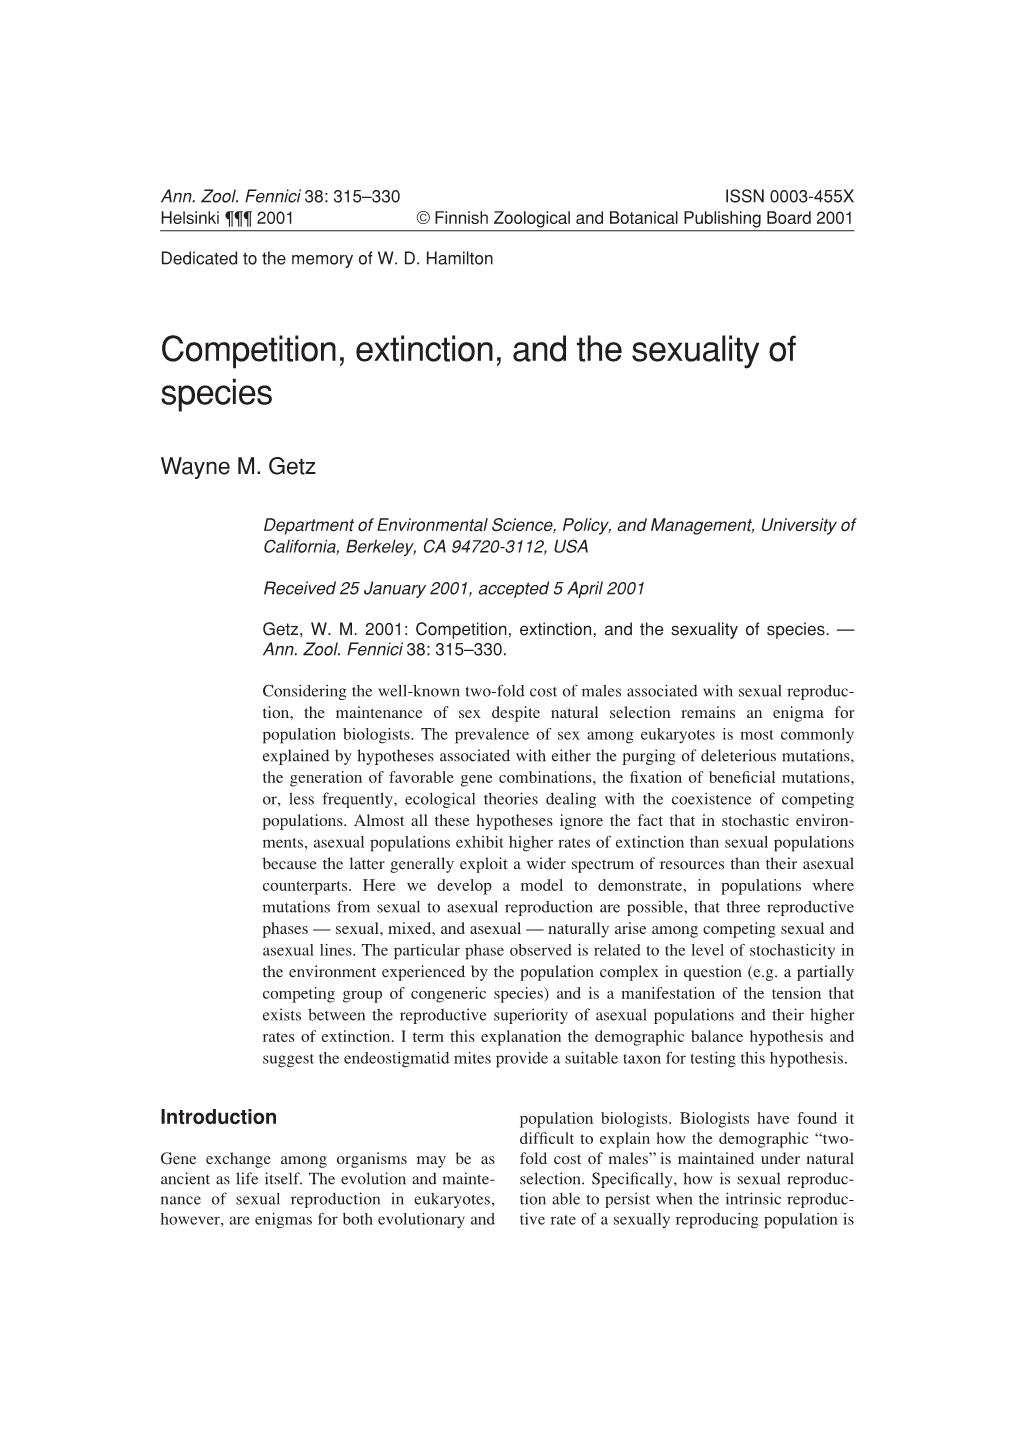 Competition, Extinction, and the Sexuality of Species